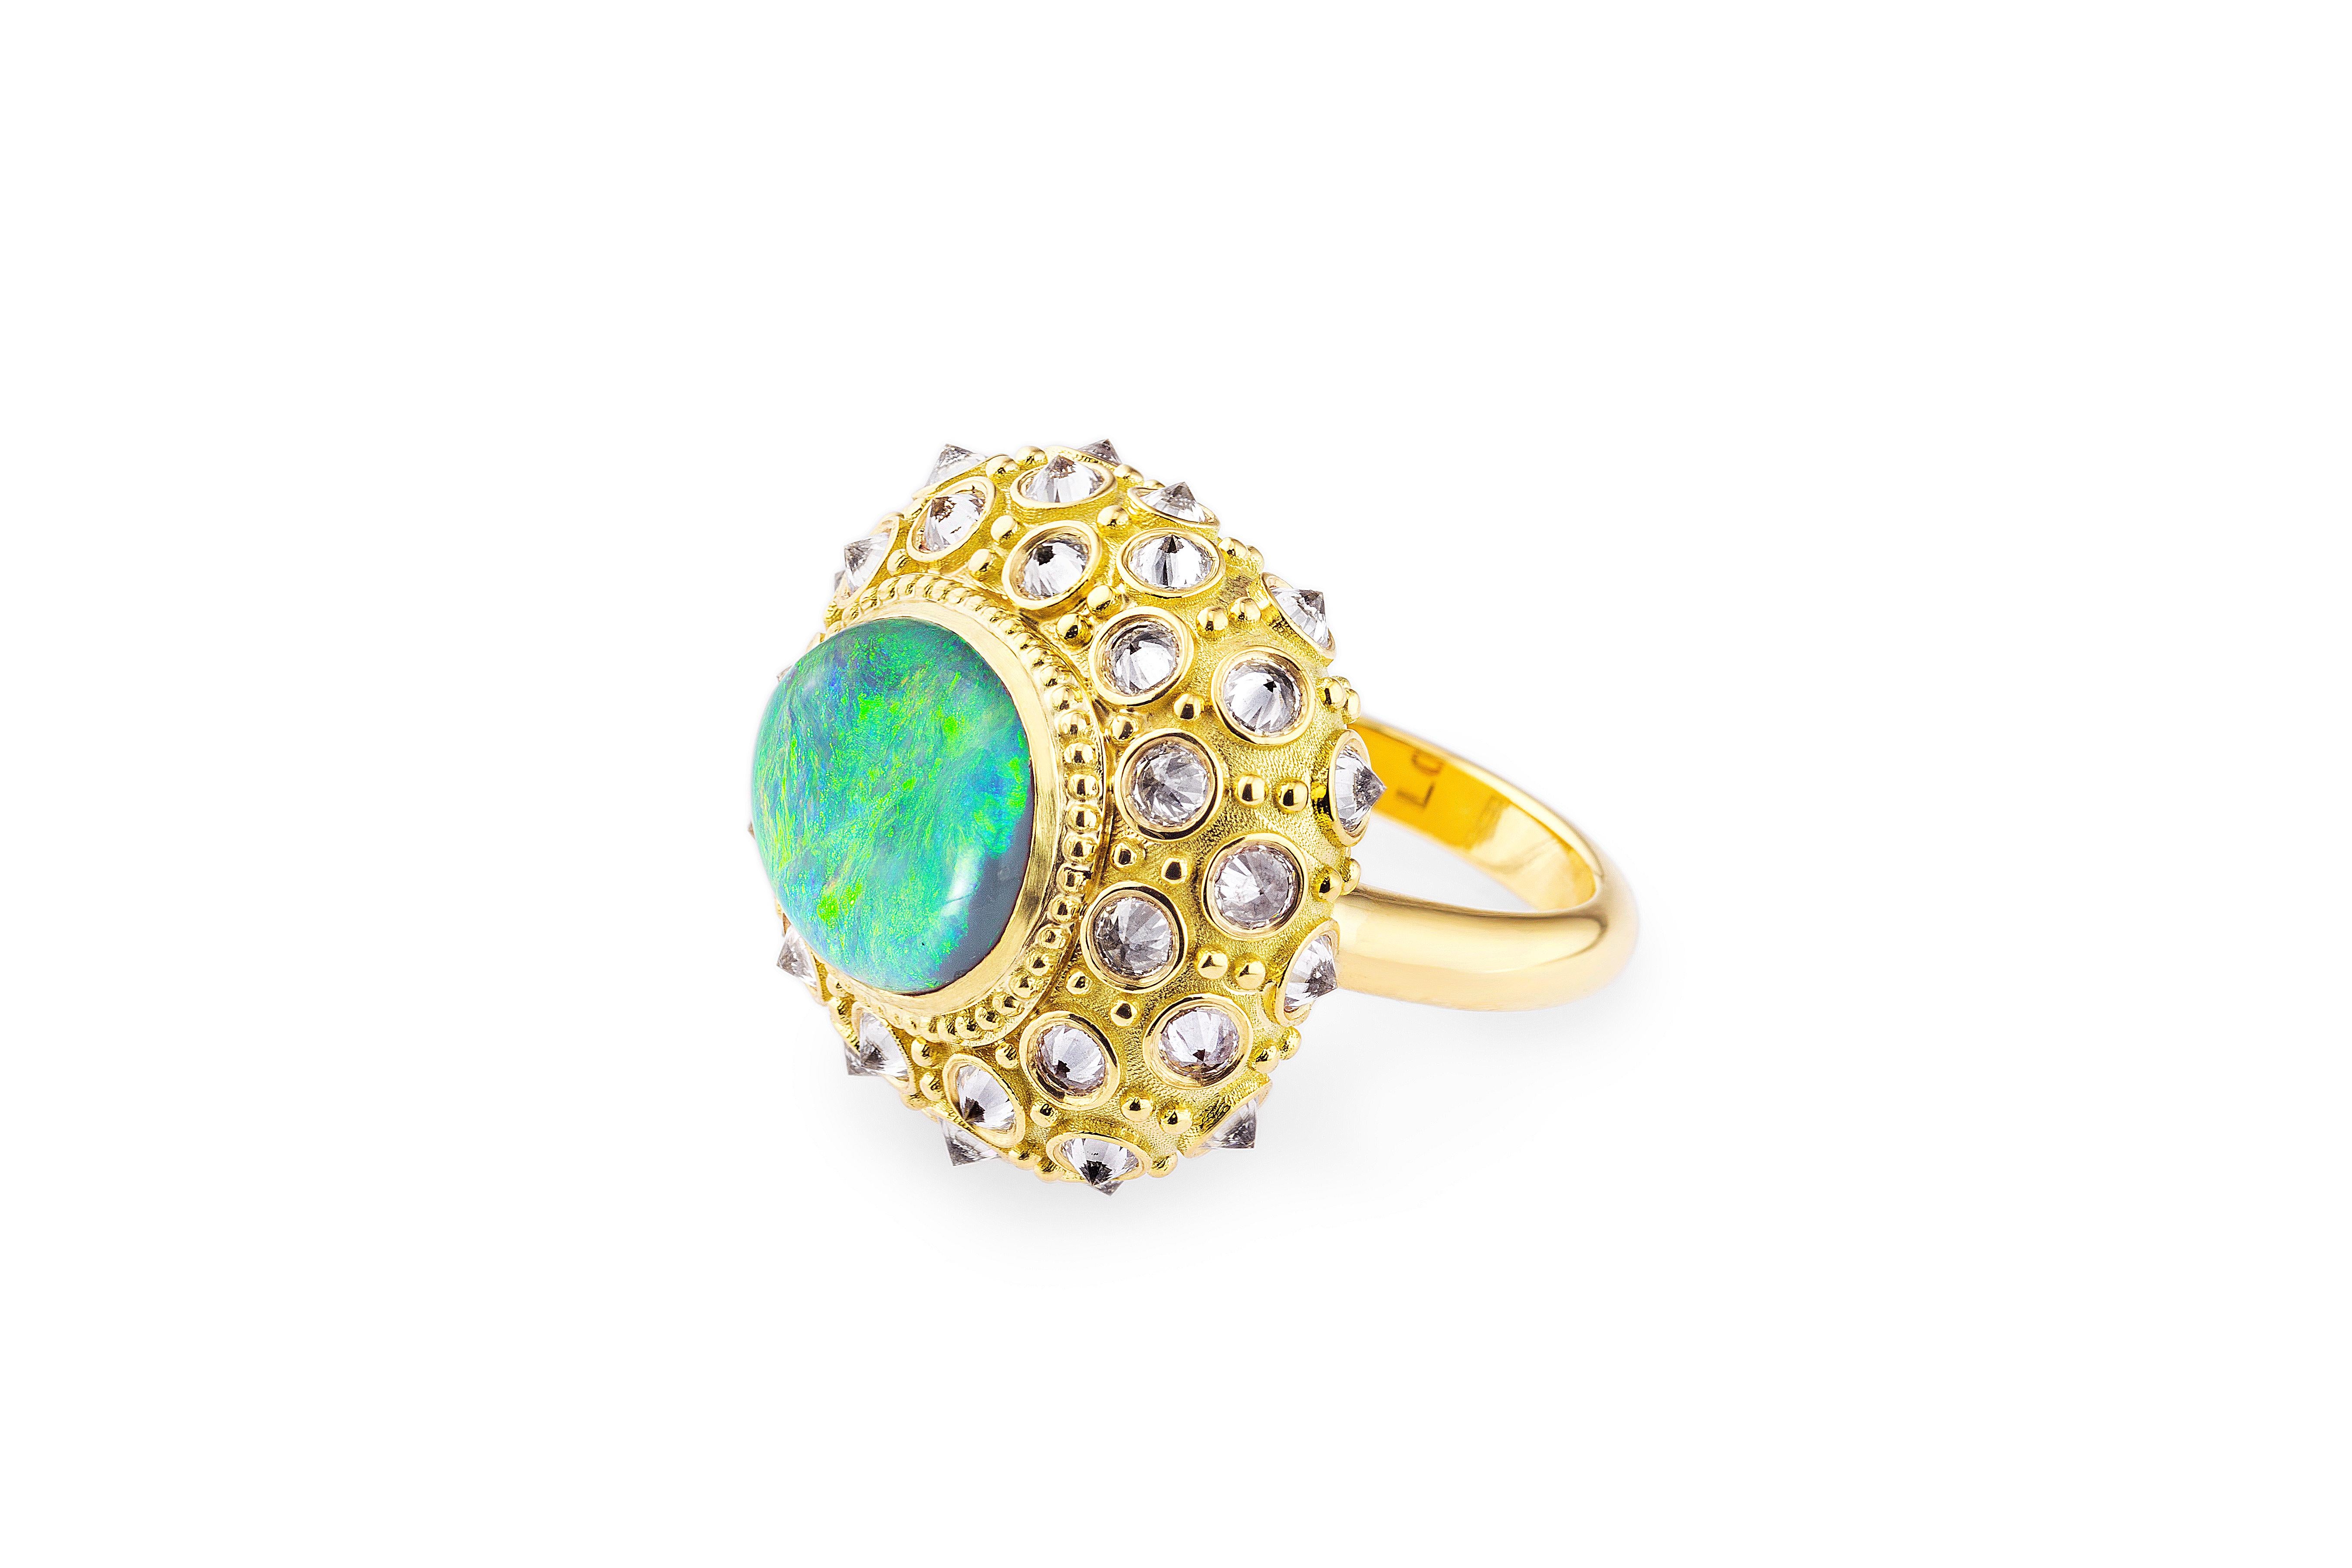 AnaKatarina’s ‘Beyond the Sea’ ‘Ring is an homage to the beautiful sea urchin and its totem of intuition and evolution. This beautiful work of art is one-of-a-kind. A Lighting Ridge black opal adorns the center of the sea urchin surrounded by